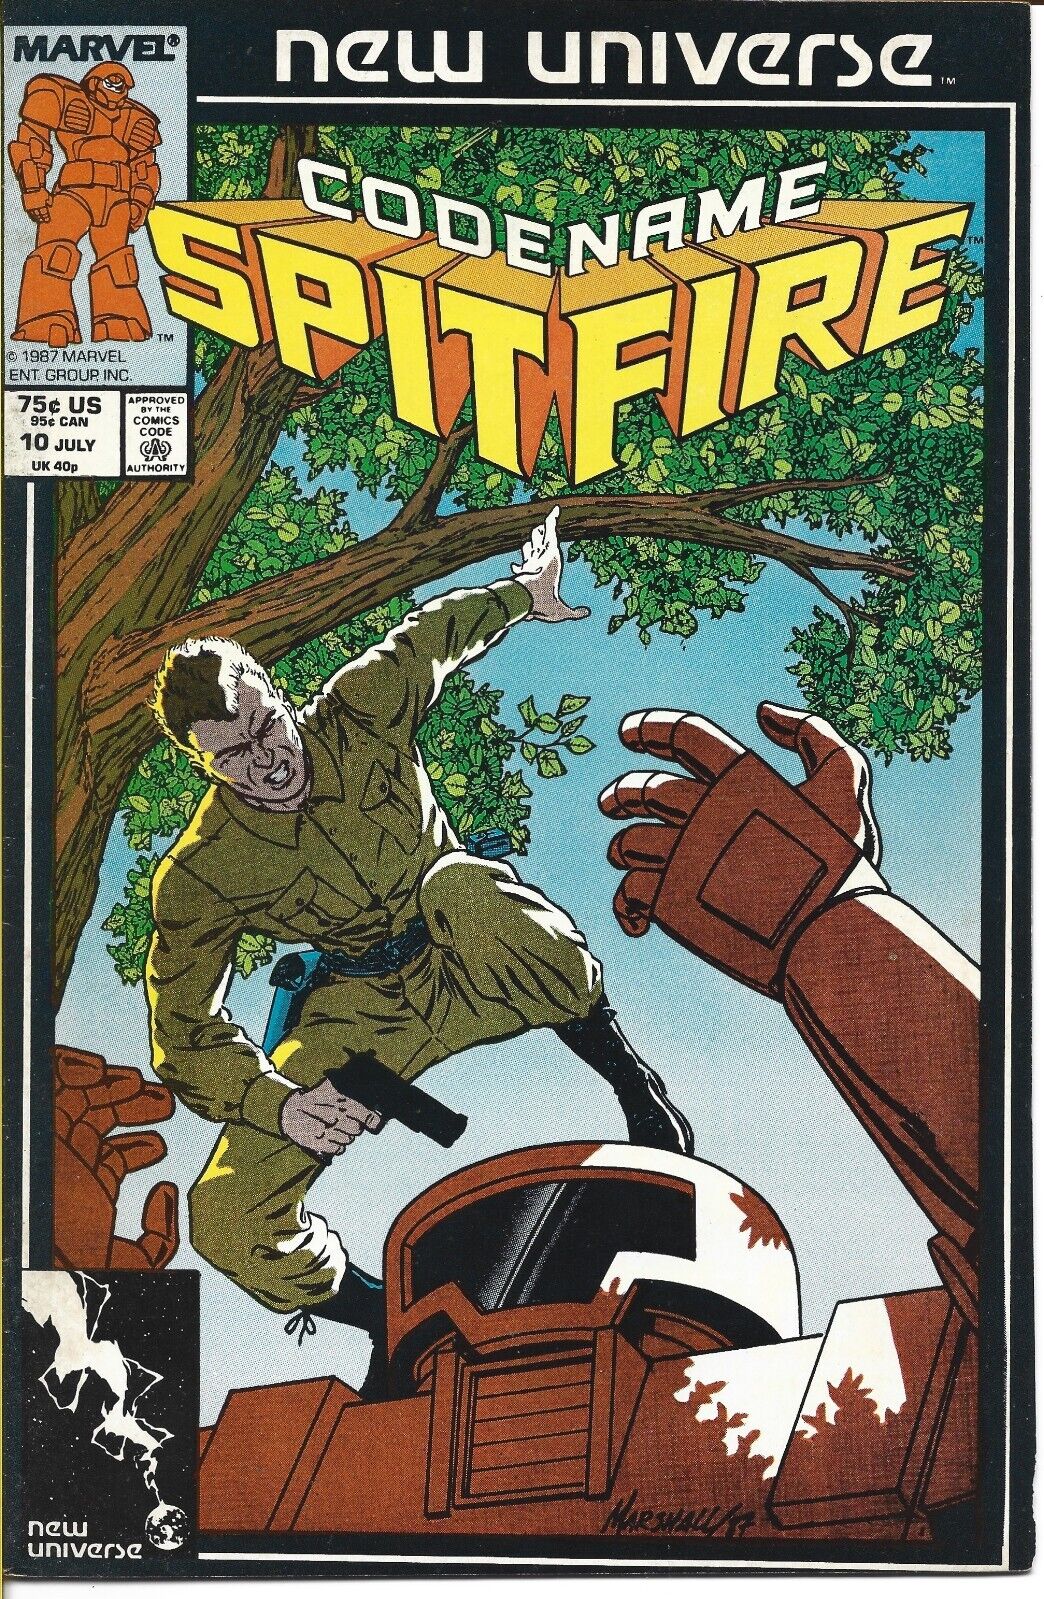 CODENAME SPITFIRE #10 MARVEL COMICS 1987 BAGGED AND BOARDED